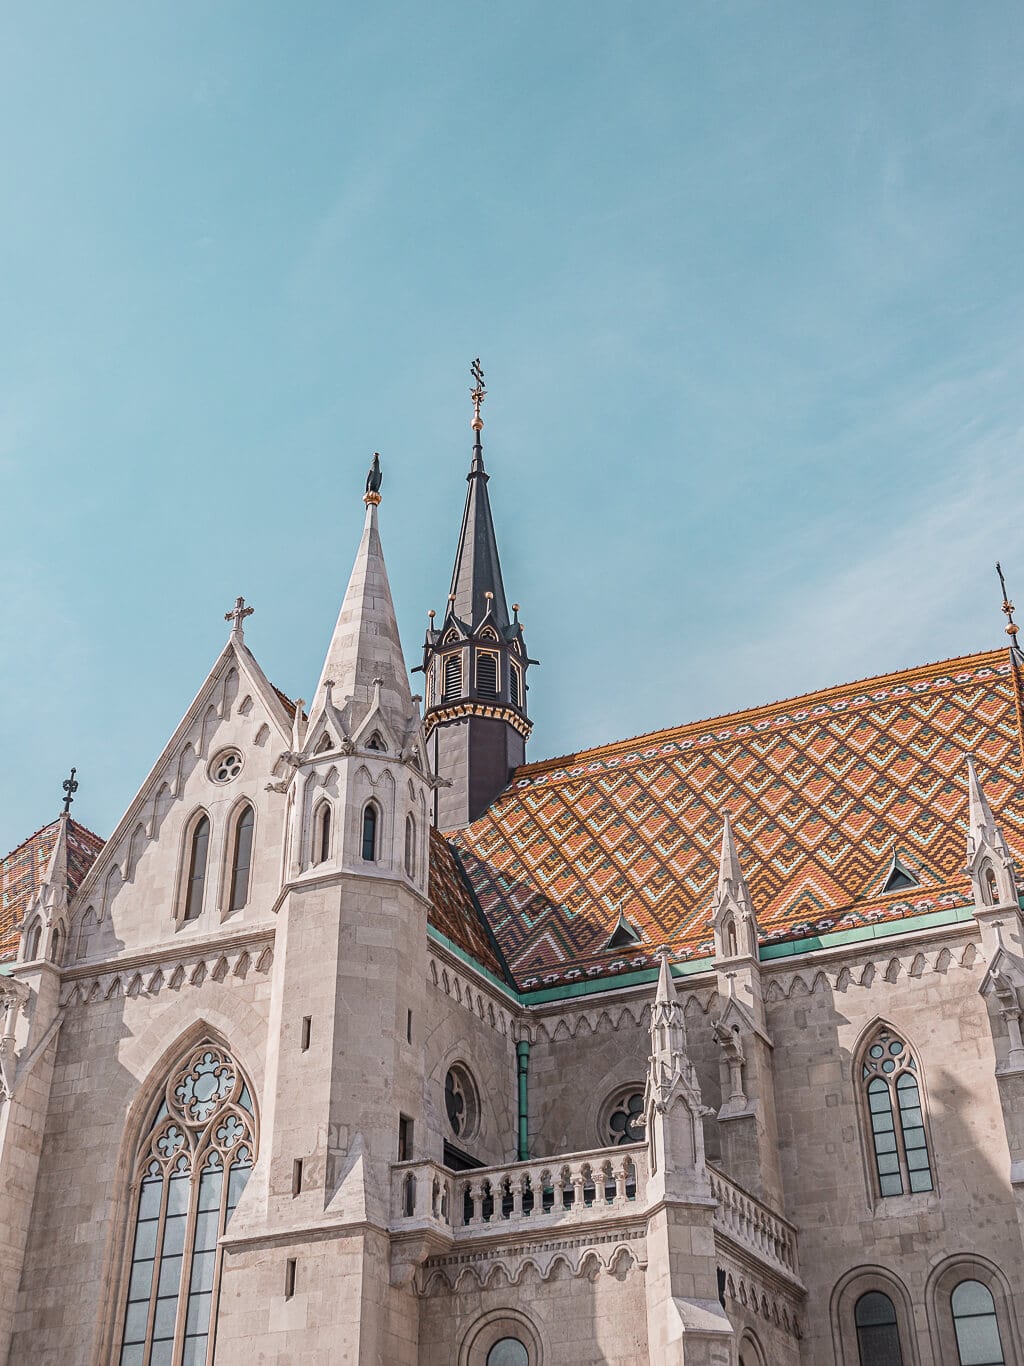 A Guide For Planning A Trip To Budapest - Things to do in the Hungarian capital {2 day itinerary, including food & restaurants tips, shopping and sightseeing}